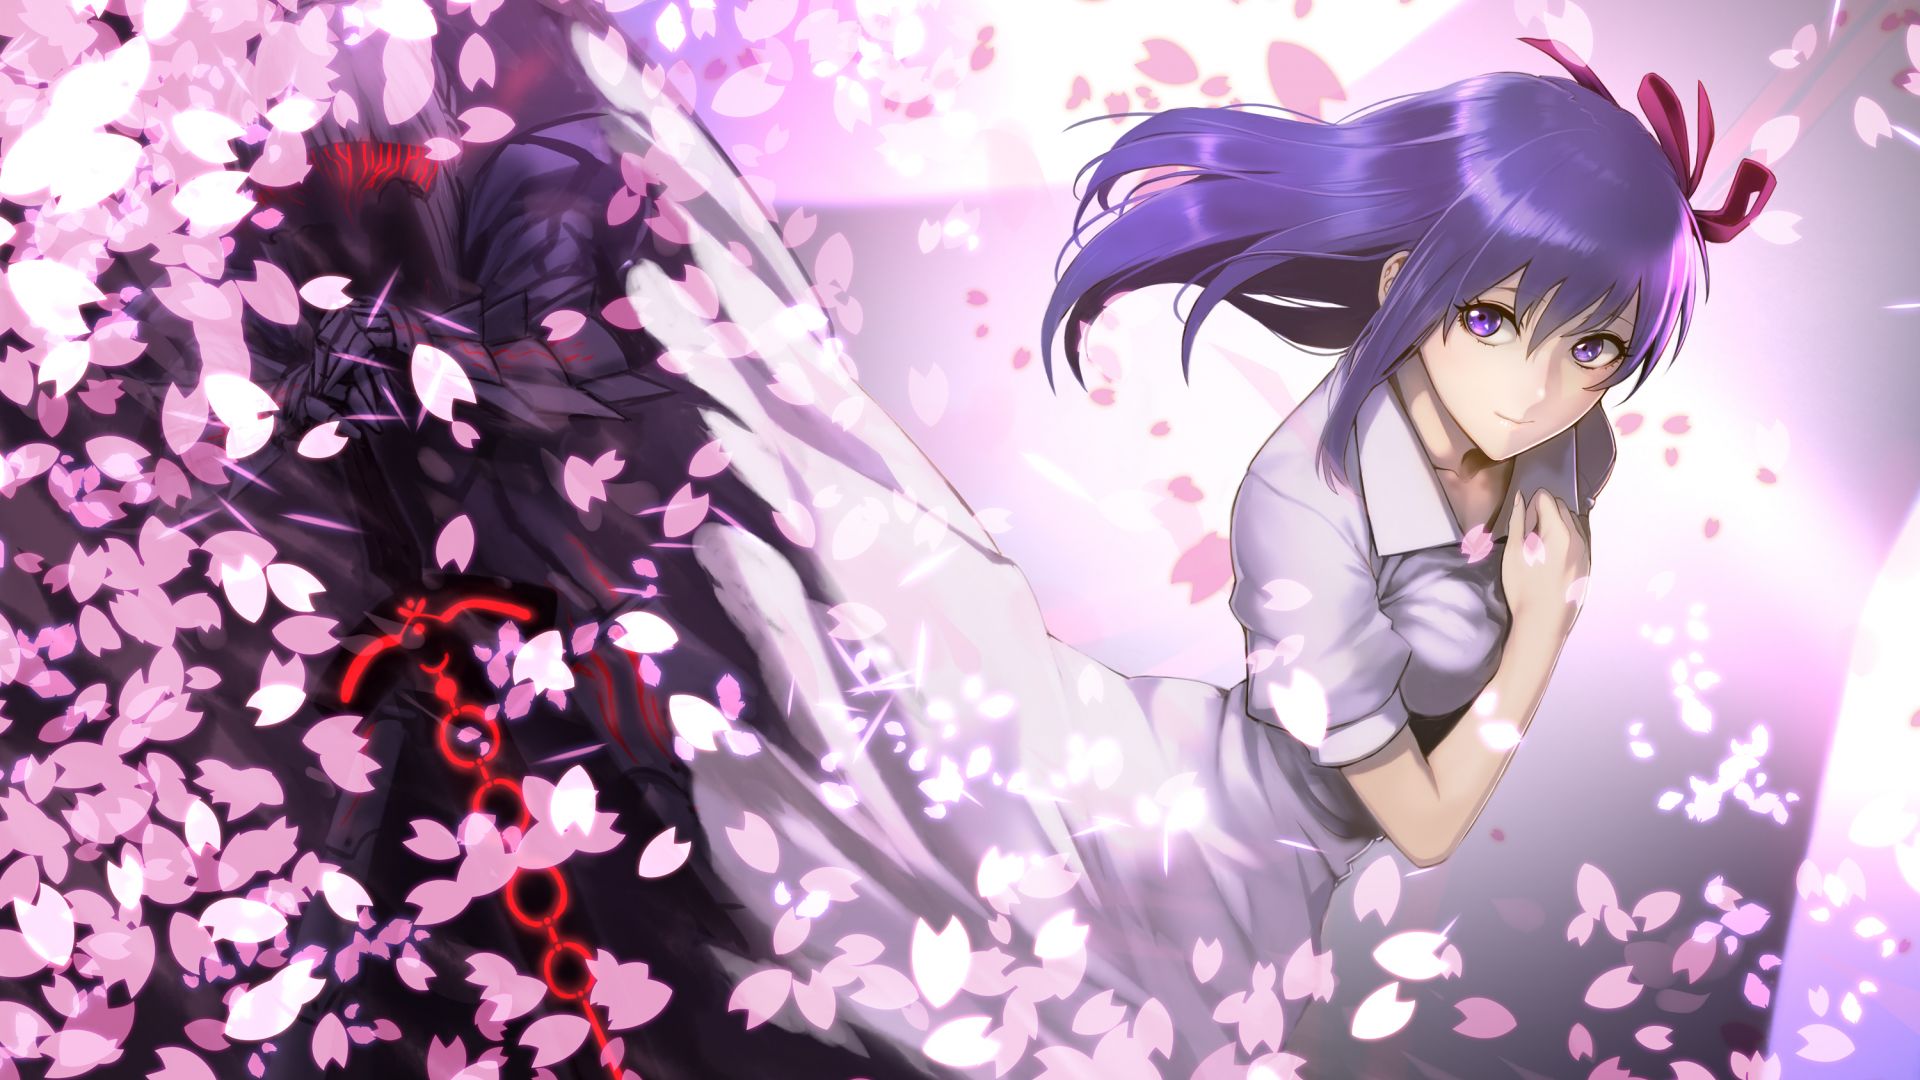 Wallpaper Fate/stay night, blossom, anime girl